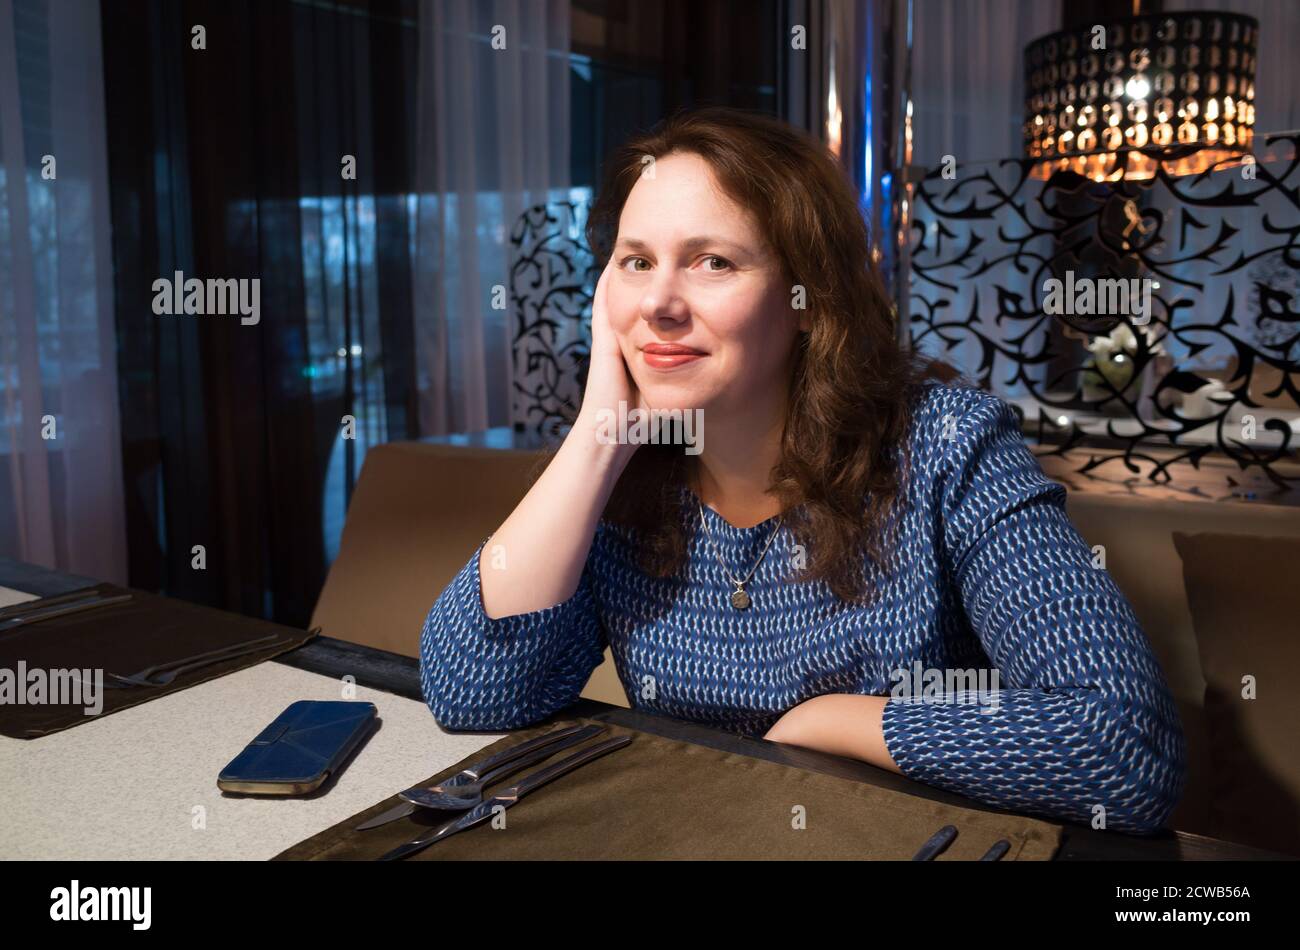 Smiling European woman waits a dish in a restaurant, close-up portrait with selective focus Stock Photo